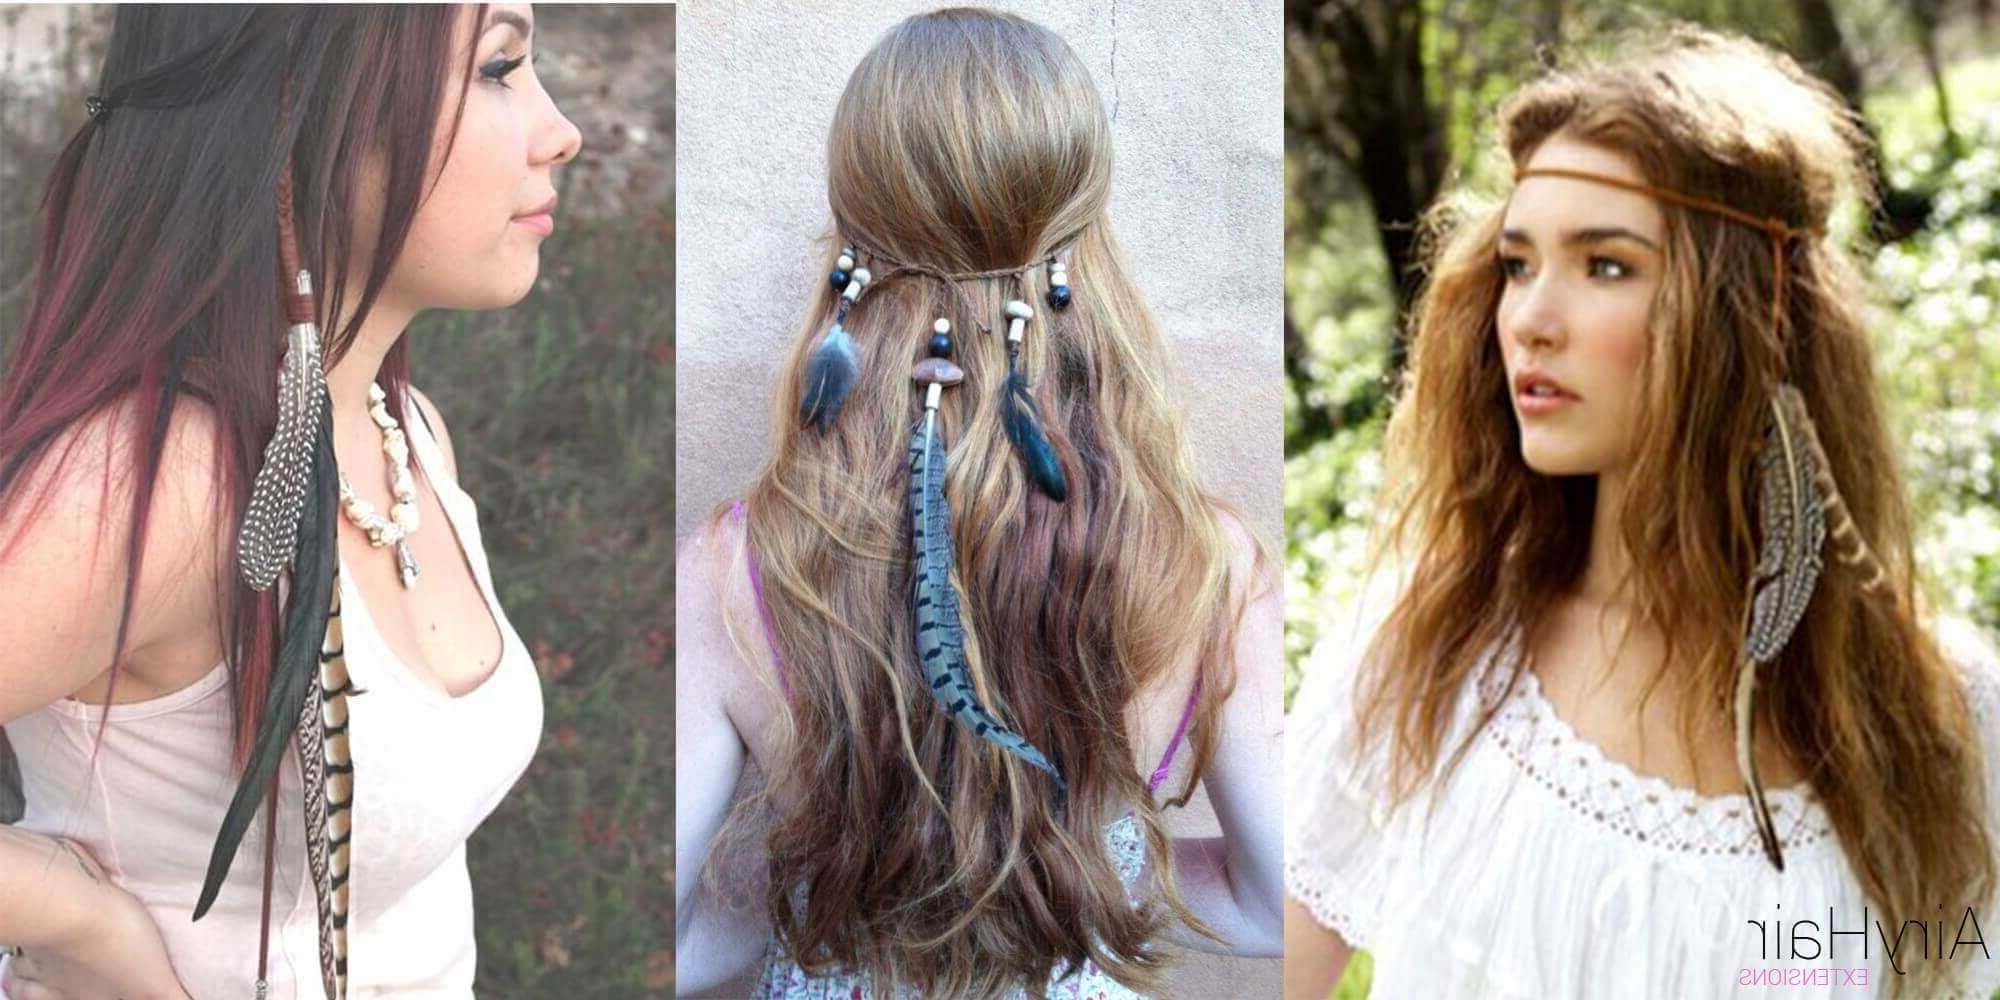 10 Best Chic And Creative Boho Hairstyles Inside 2018 Bohemian Medium Hairstyles (View 10 of 20)